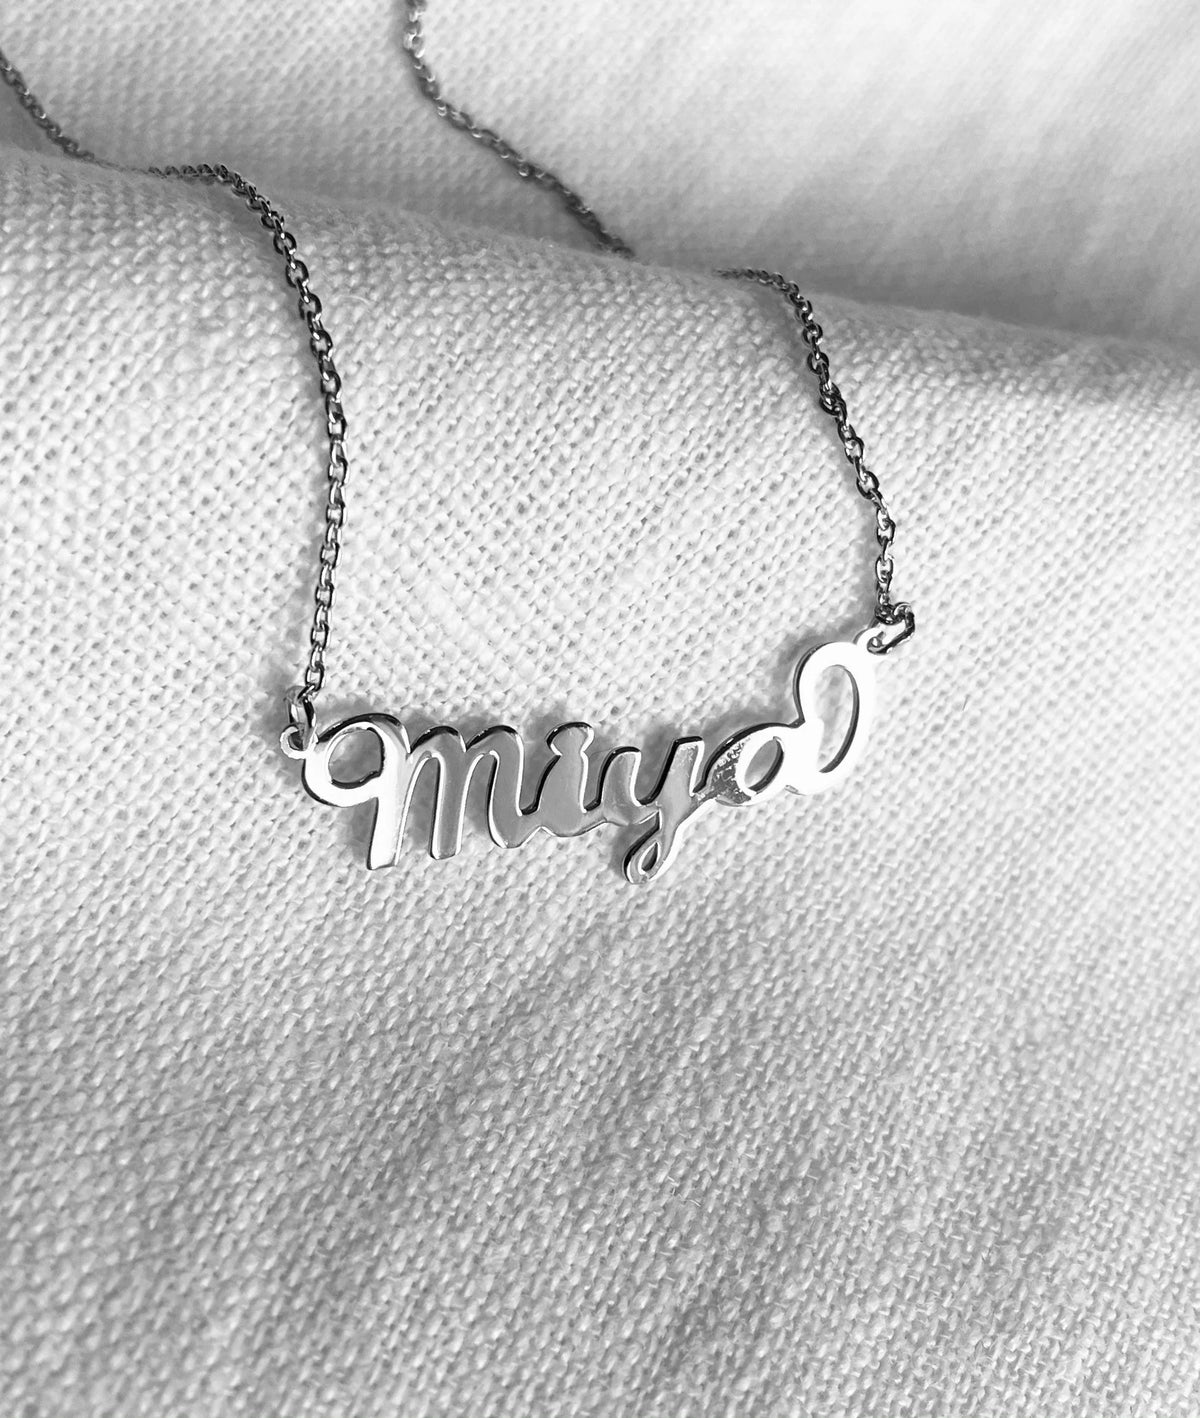 Cursive Name Necklace - Available in 10k, 14k, and Sterling Silver - Made to Order